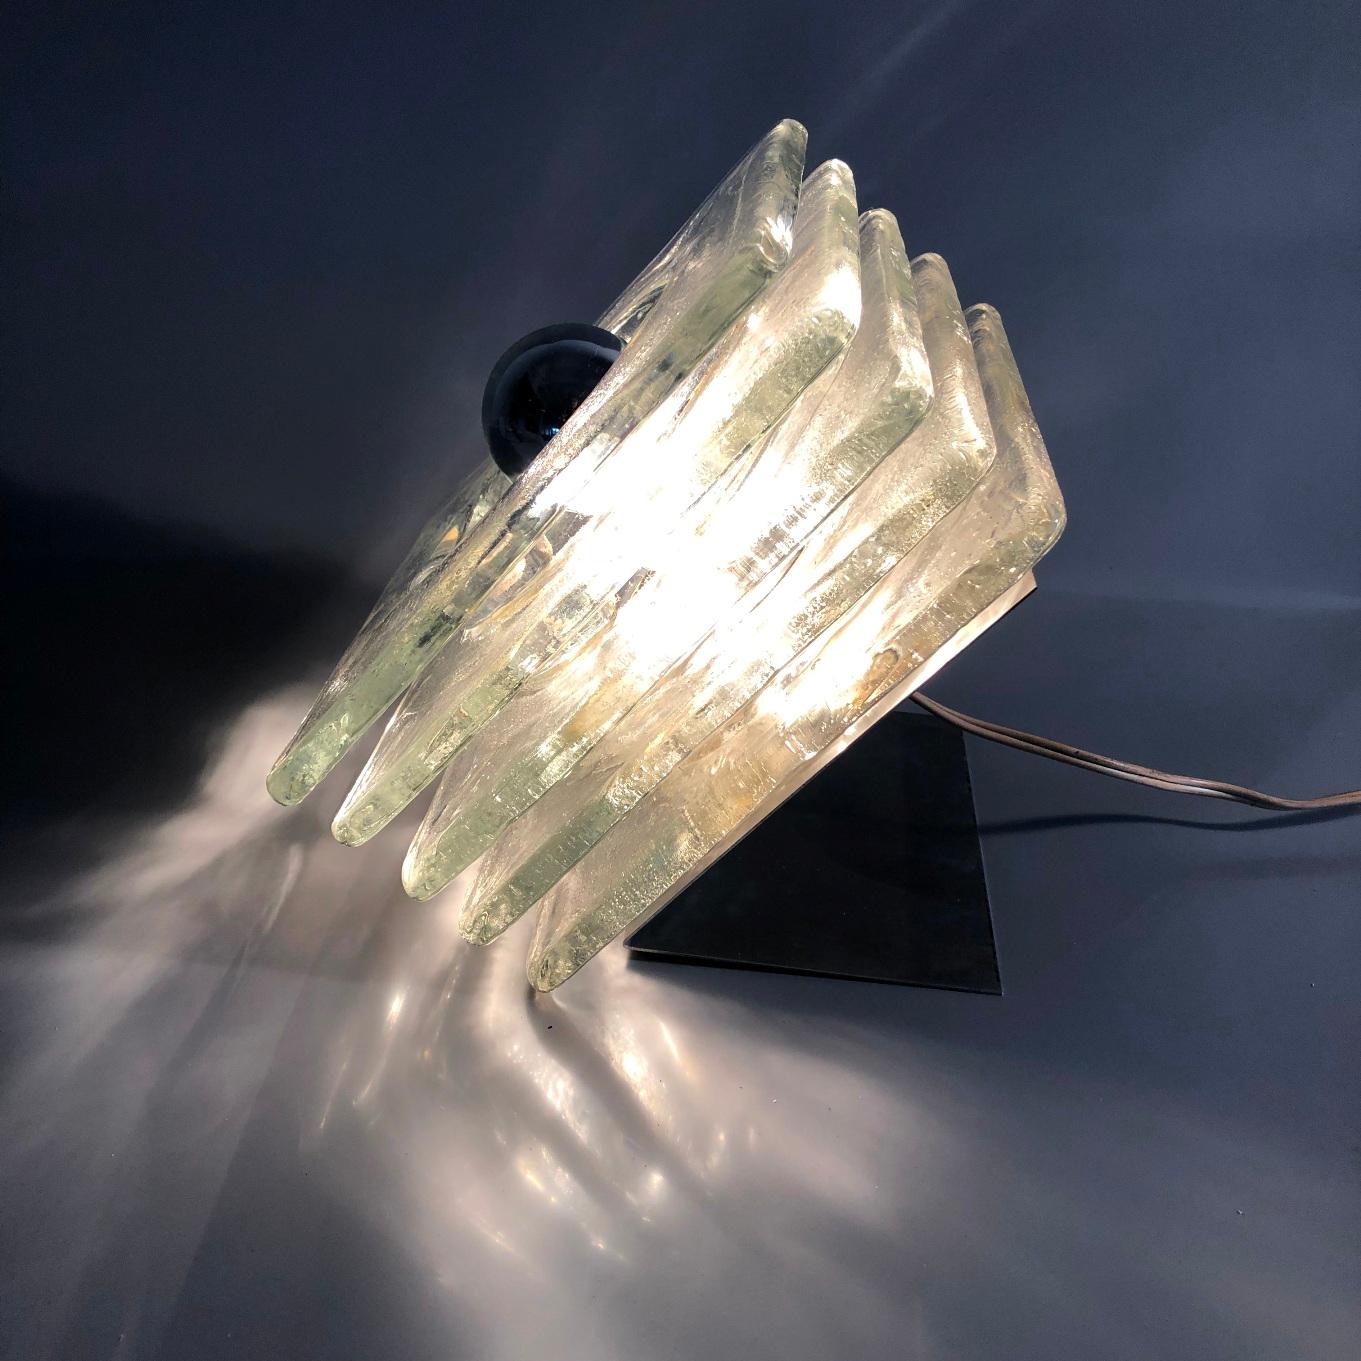 Spaceage Layered Murano Glass Sheets Cube Table Light, Italy, 1970s For Sale 2